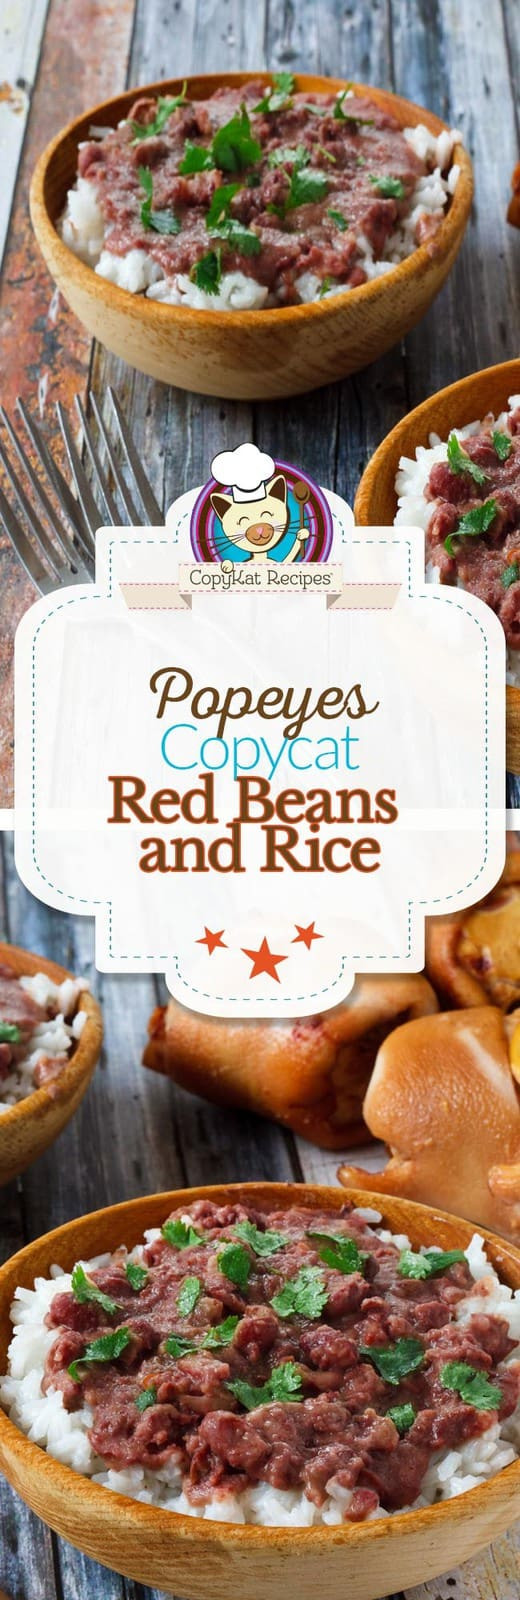 Popeyes Red Beans And Rice Recipe
 popeyes recipe for red beans and rice